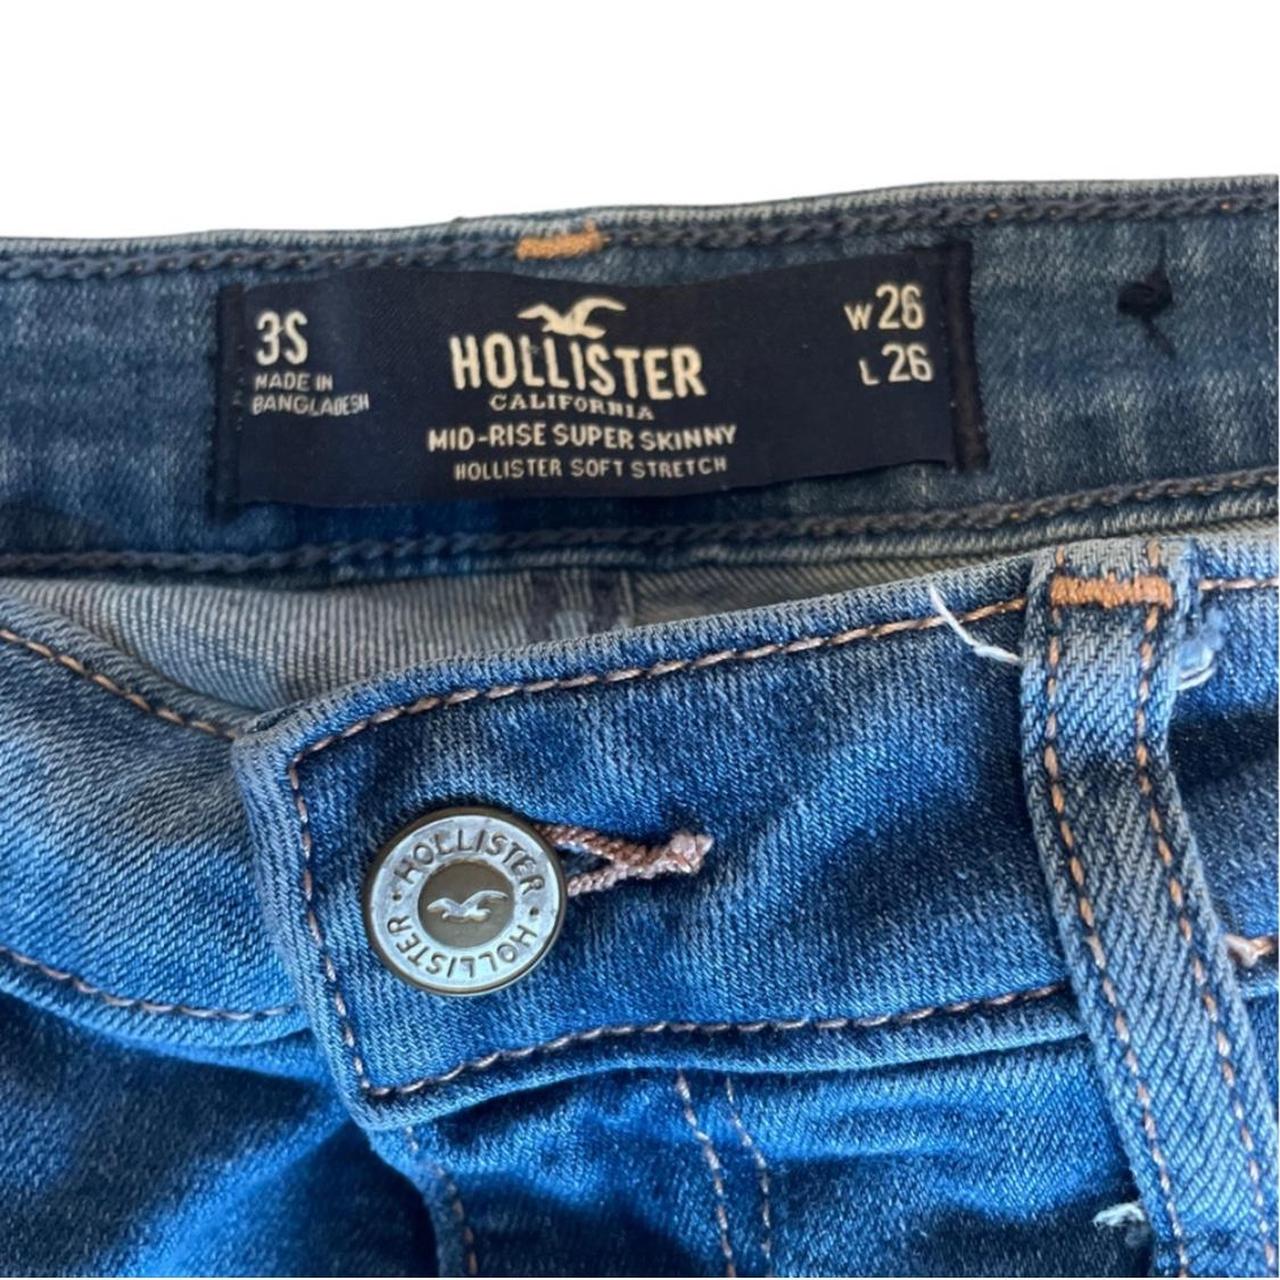 Women's Hollister California Jeans Size 3S High Rise Skinny Stretch Juniors